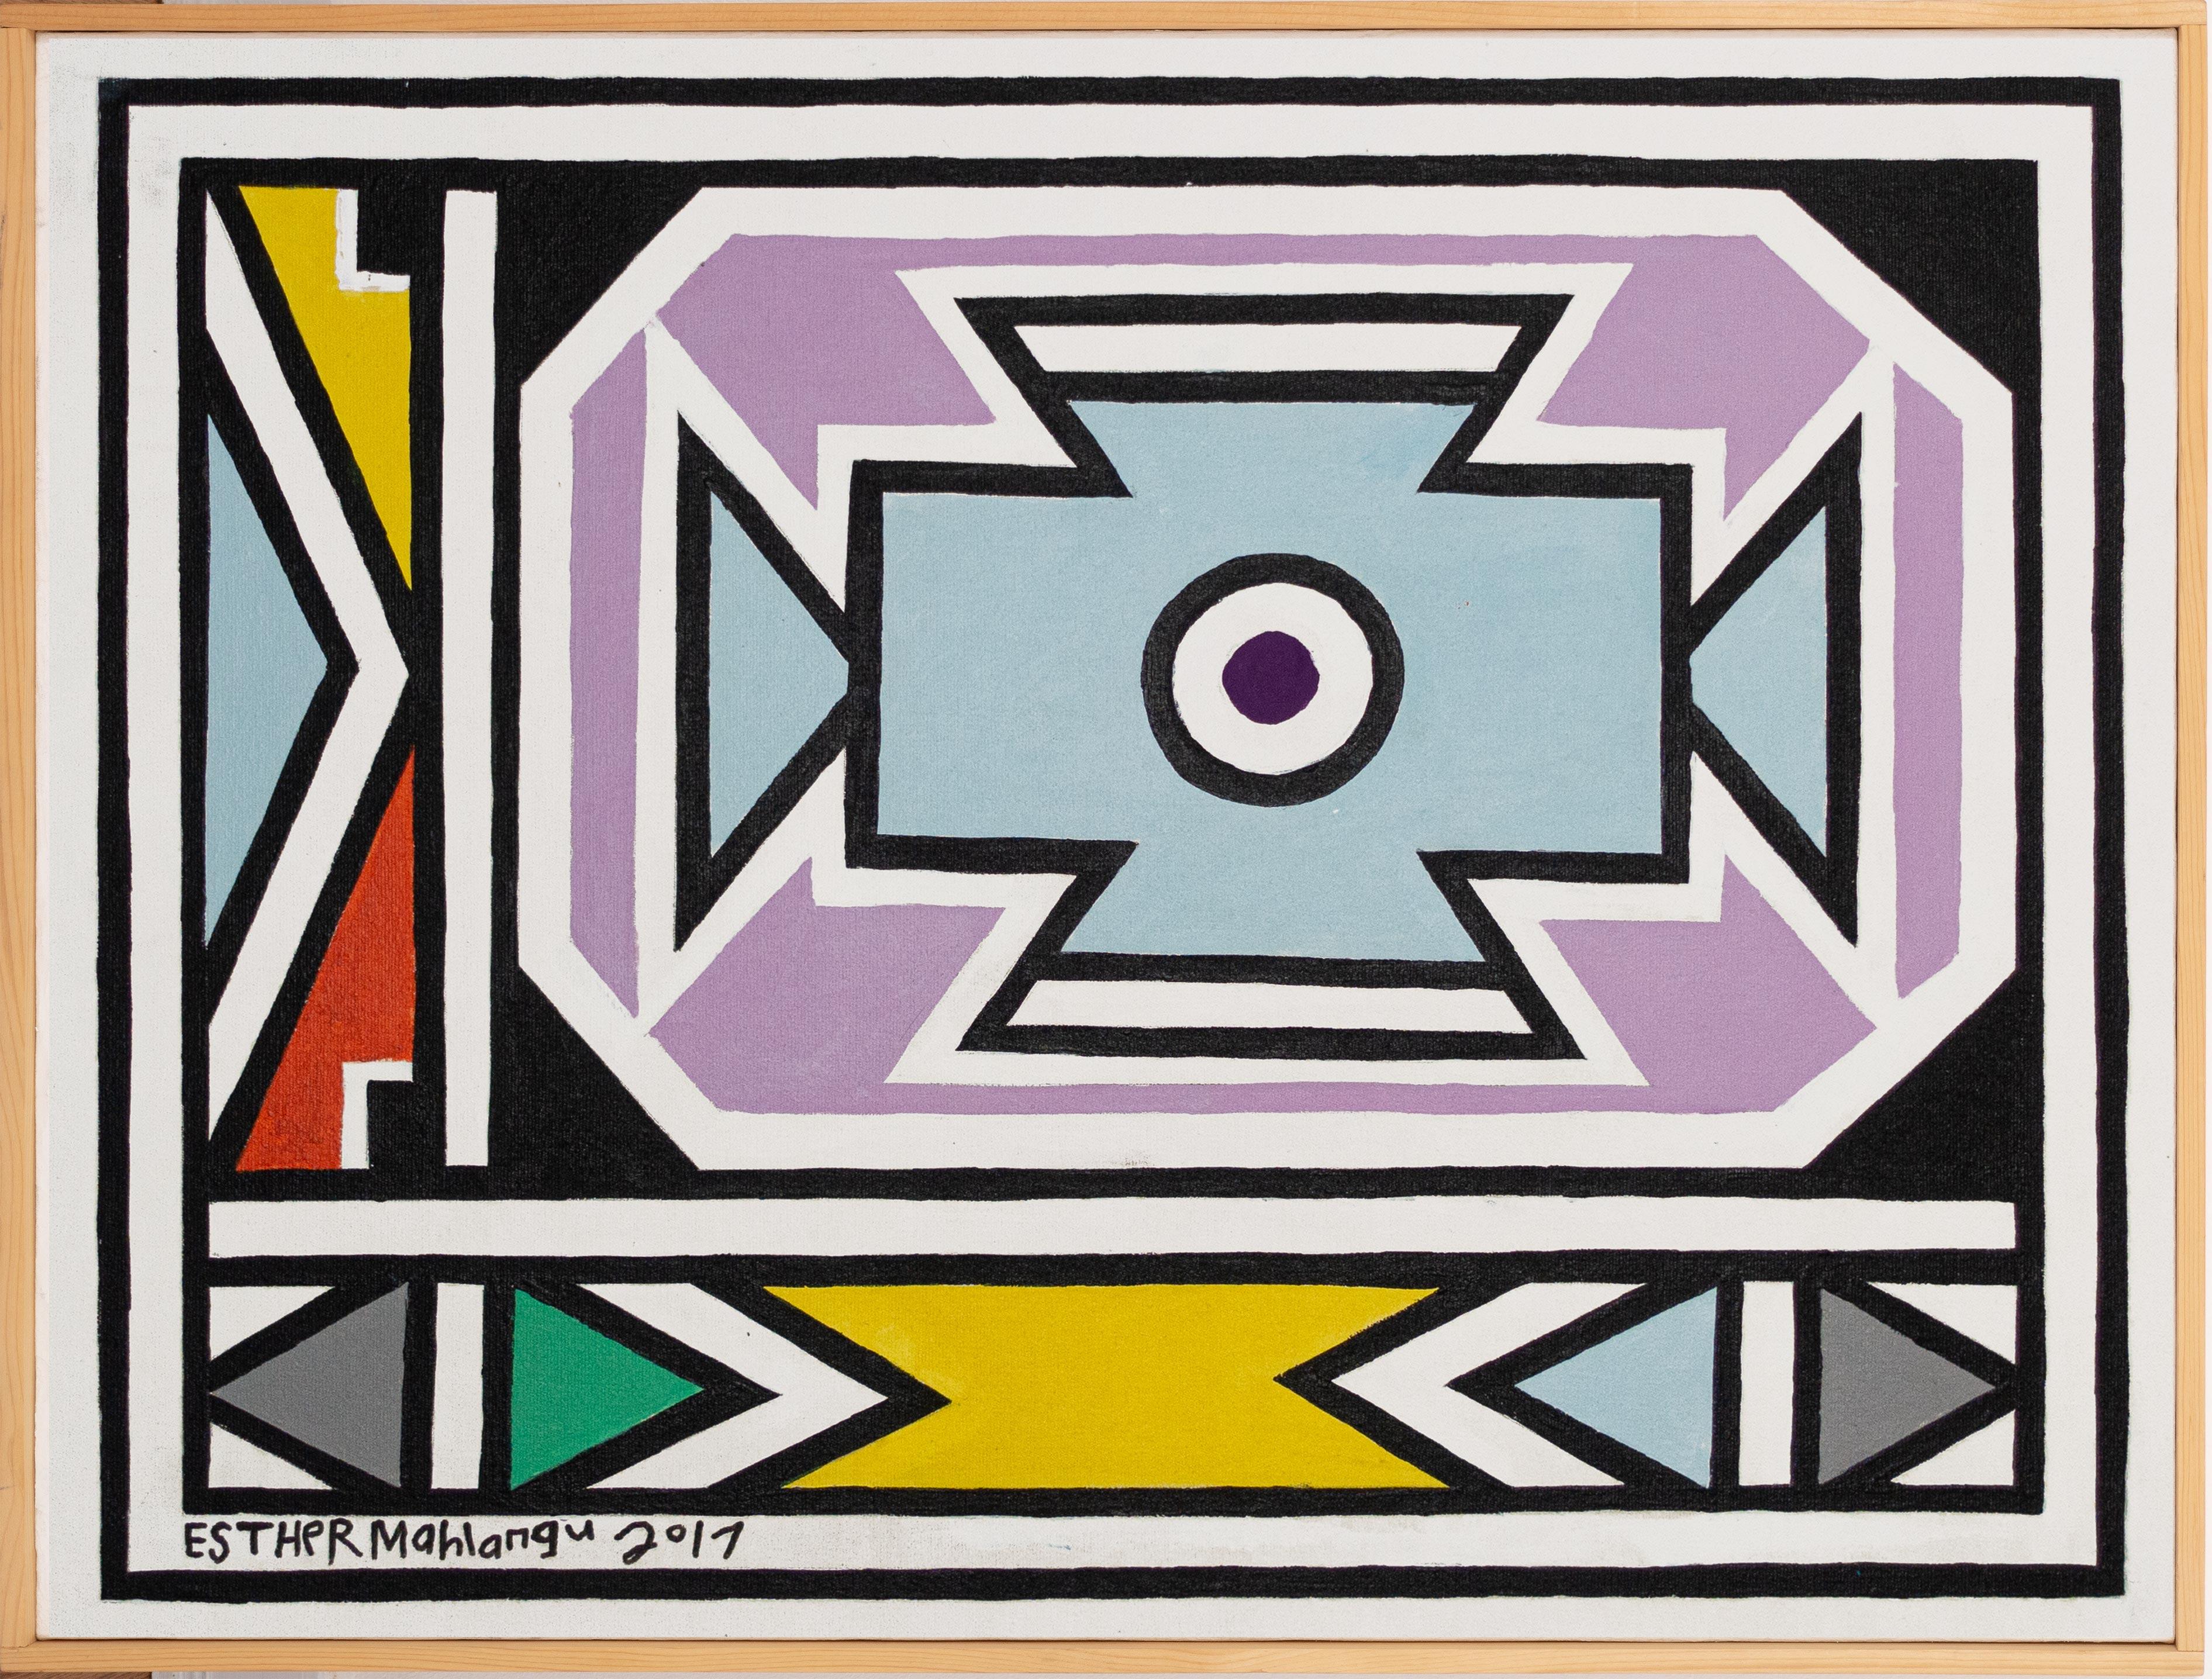 Original Ndembele Abstract acrylic painting by Esther Mahlangu dating back 2017.
Signed and dated on the front on the lower left.

The piece is accompanied by a certification of authenticity, issued by the gallery.
As the piece travels from Italy,